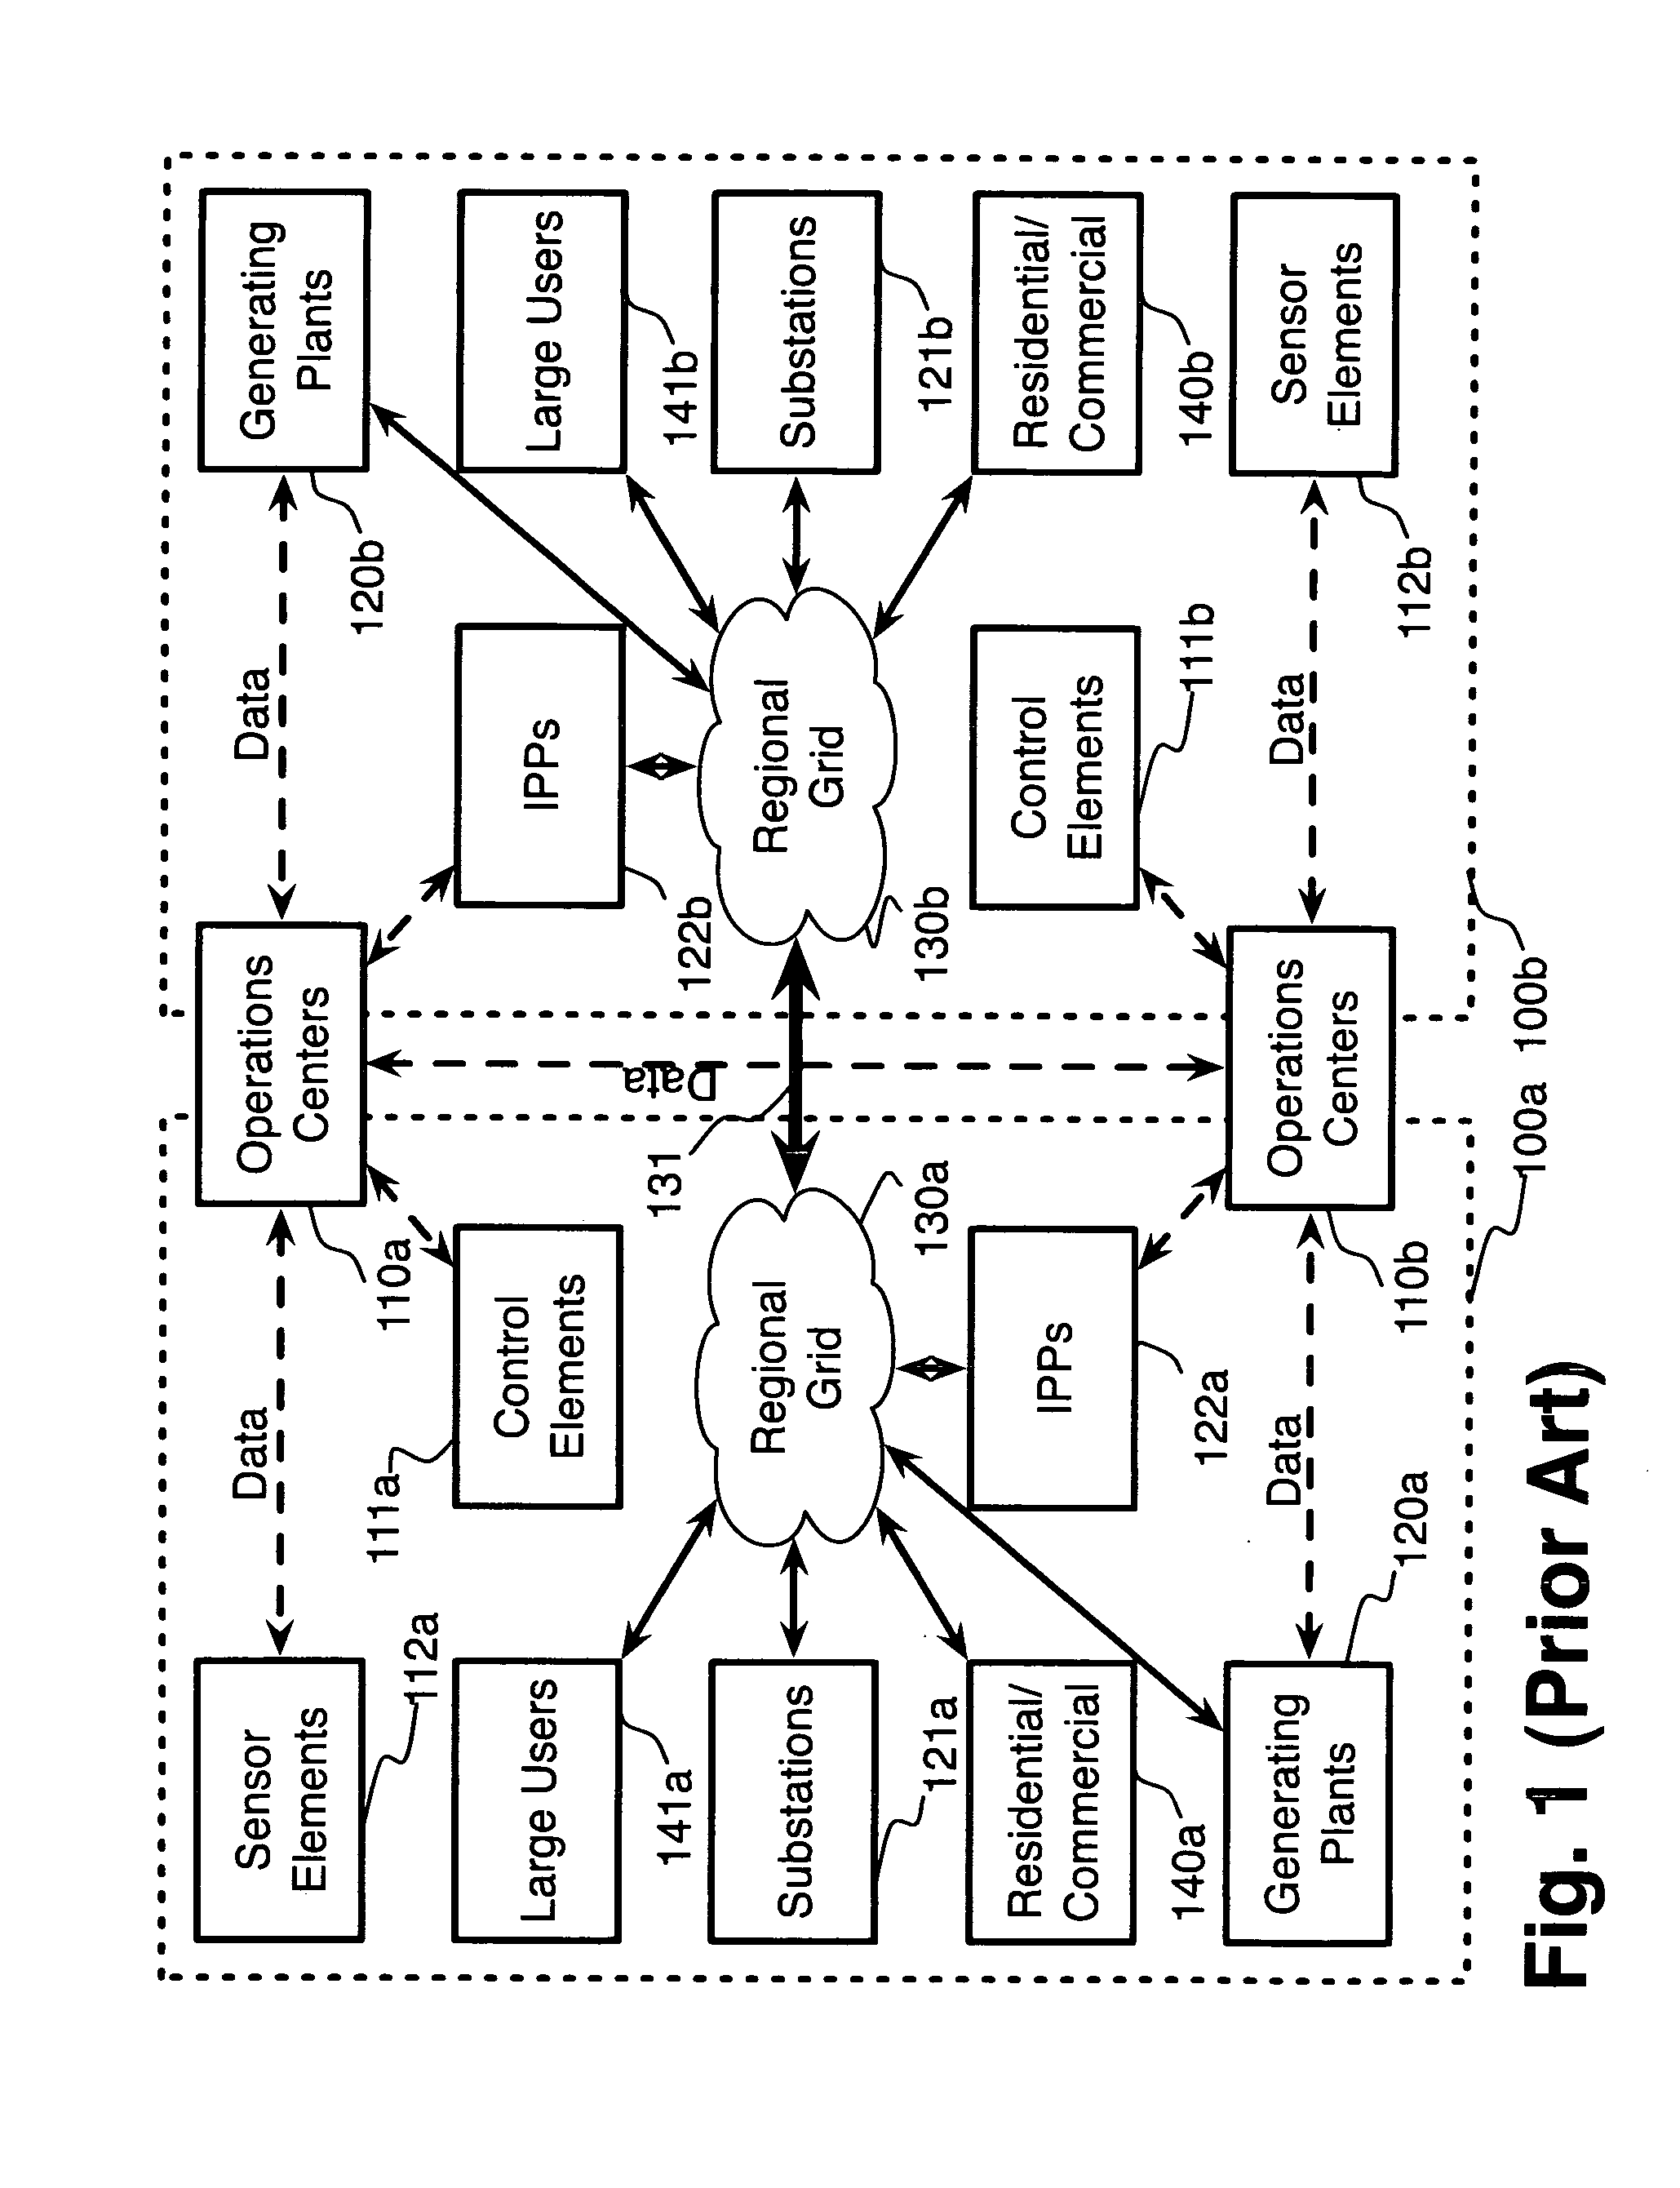 System and method for managing energy resources based on a scoring system